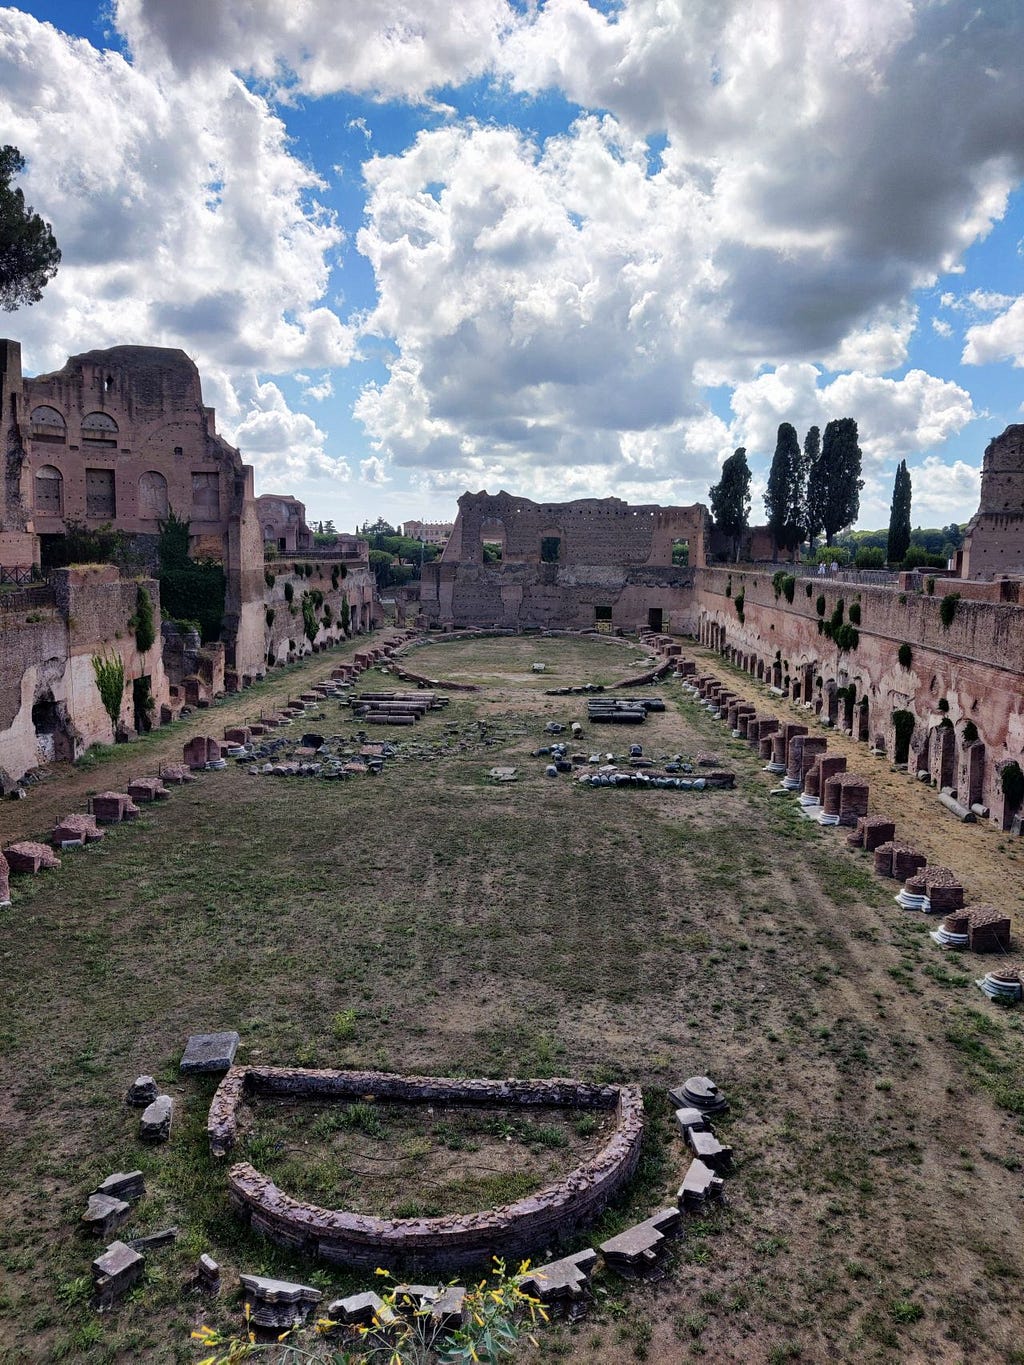 Palatine hill in Rome on a cloudy day